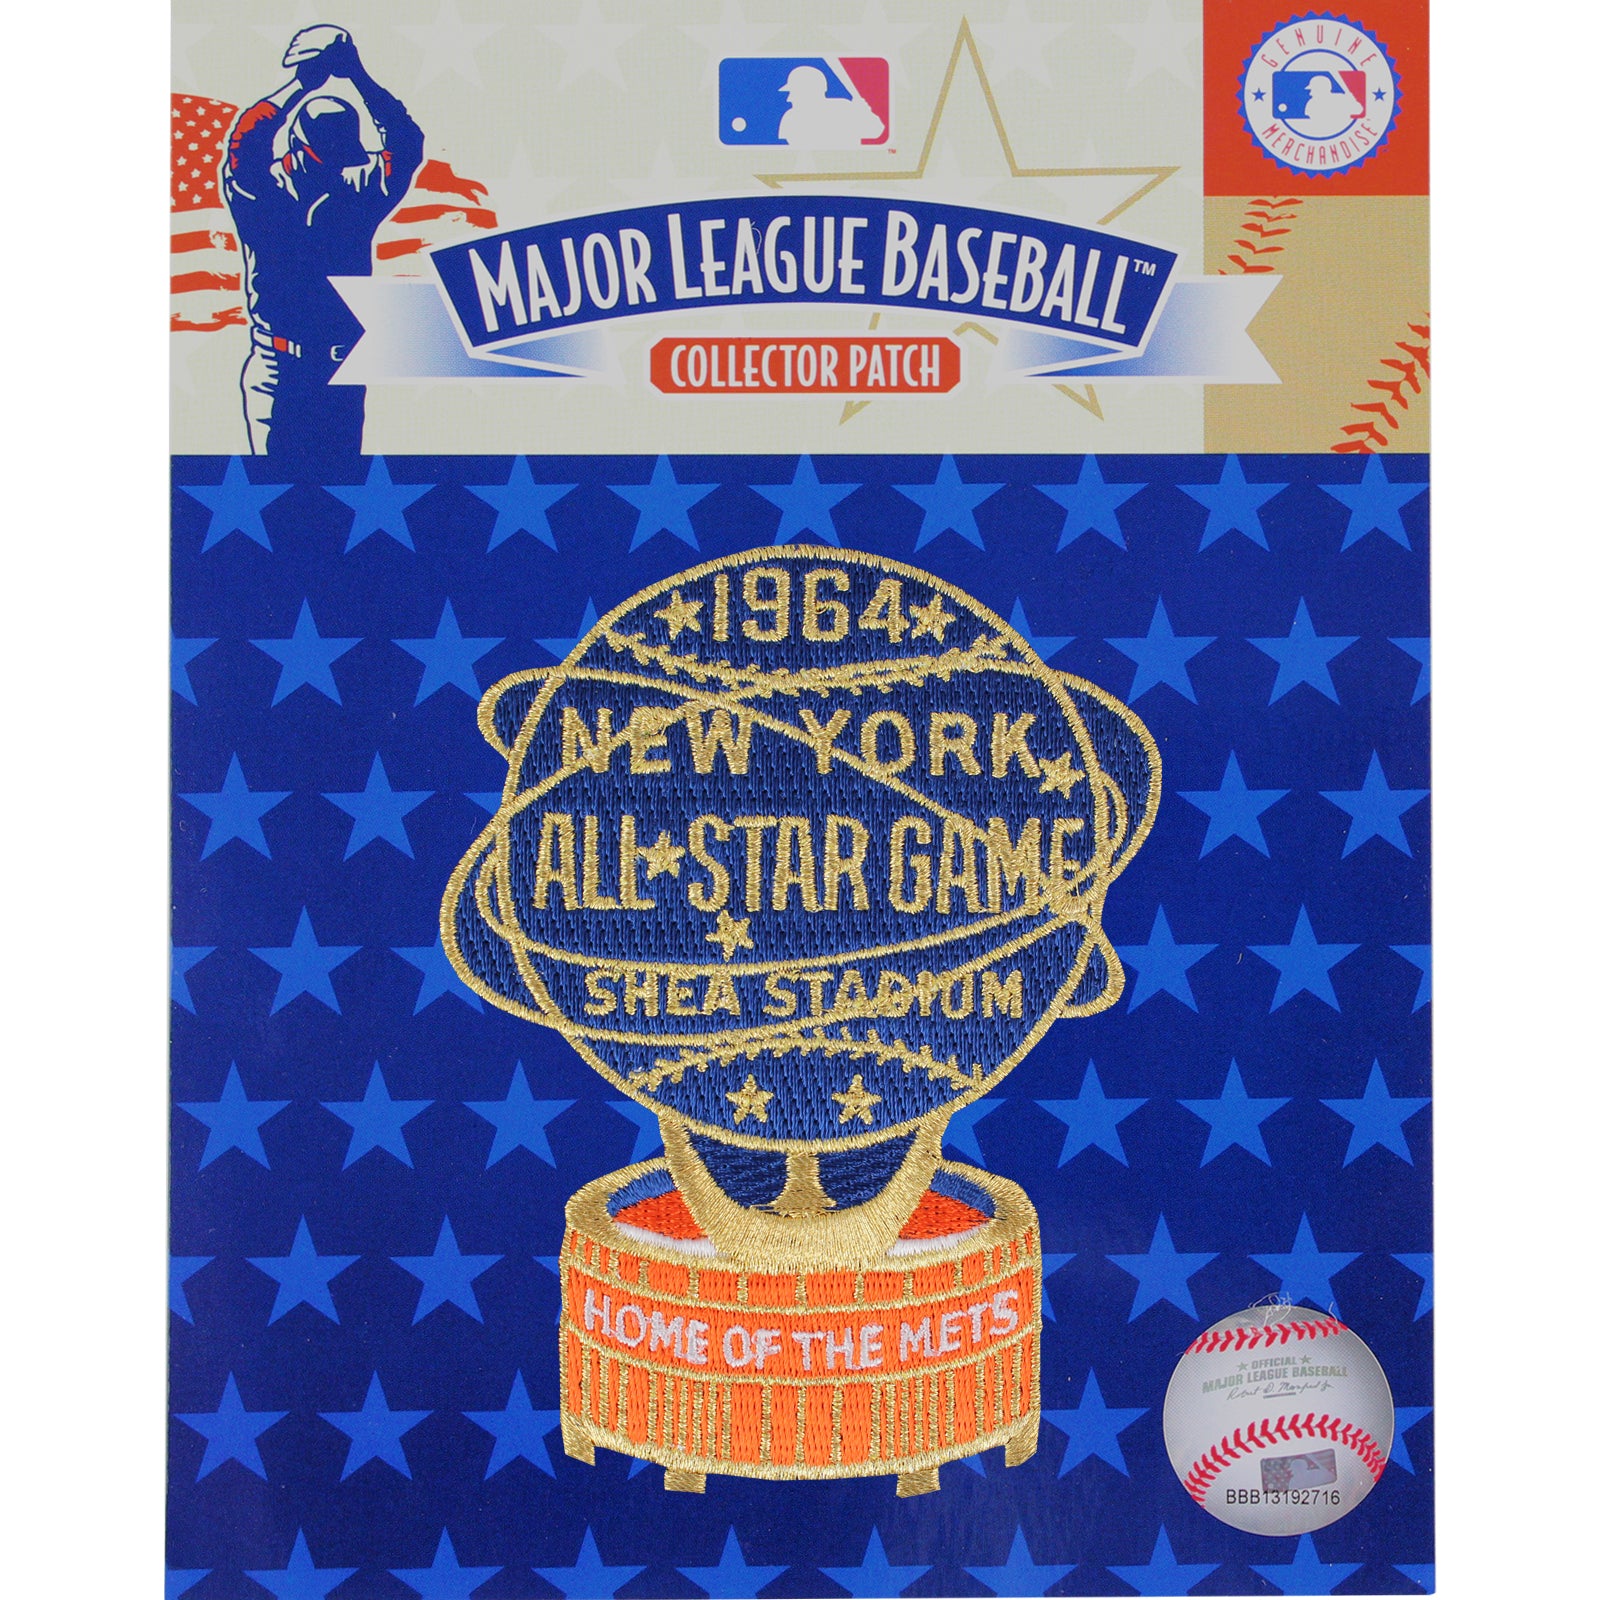 New York Mets Replica 1964 All-Star Game Patch